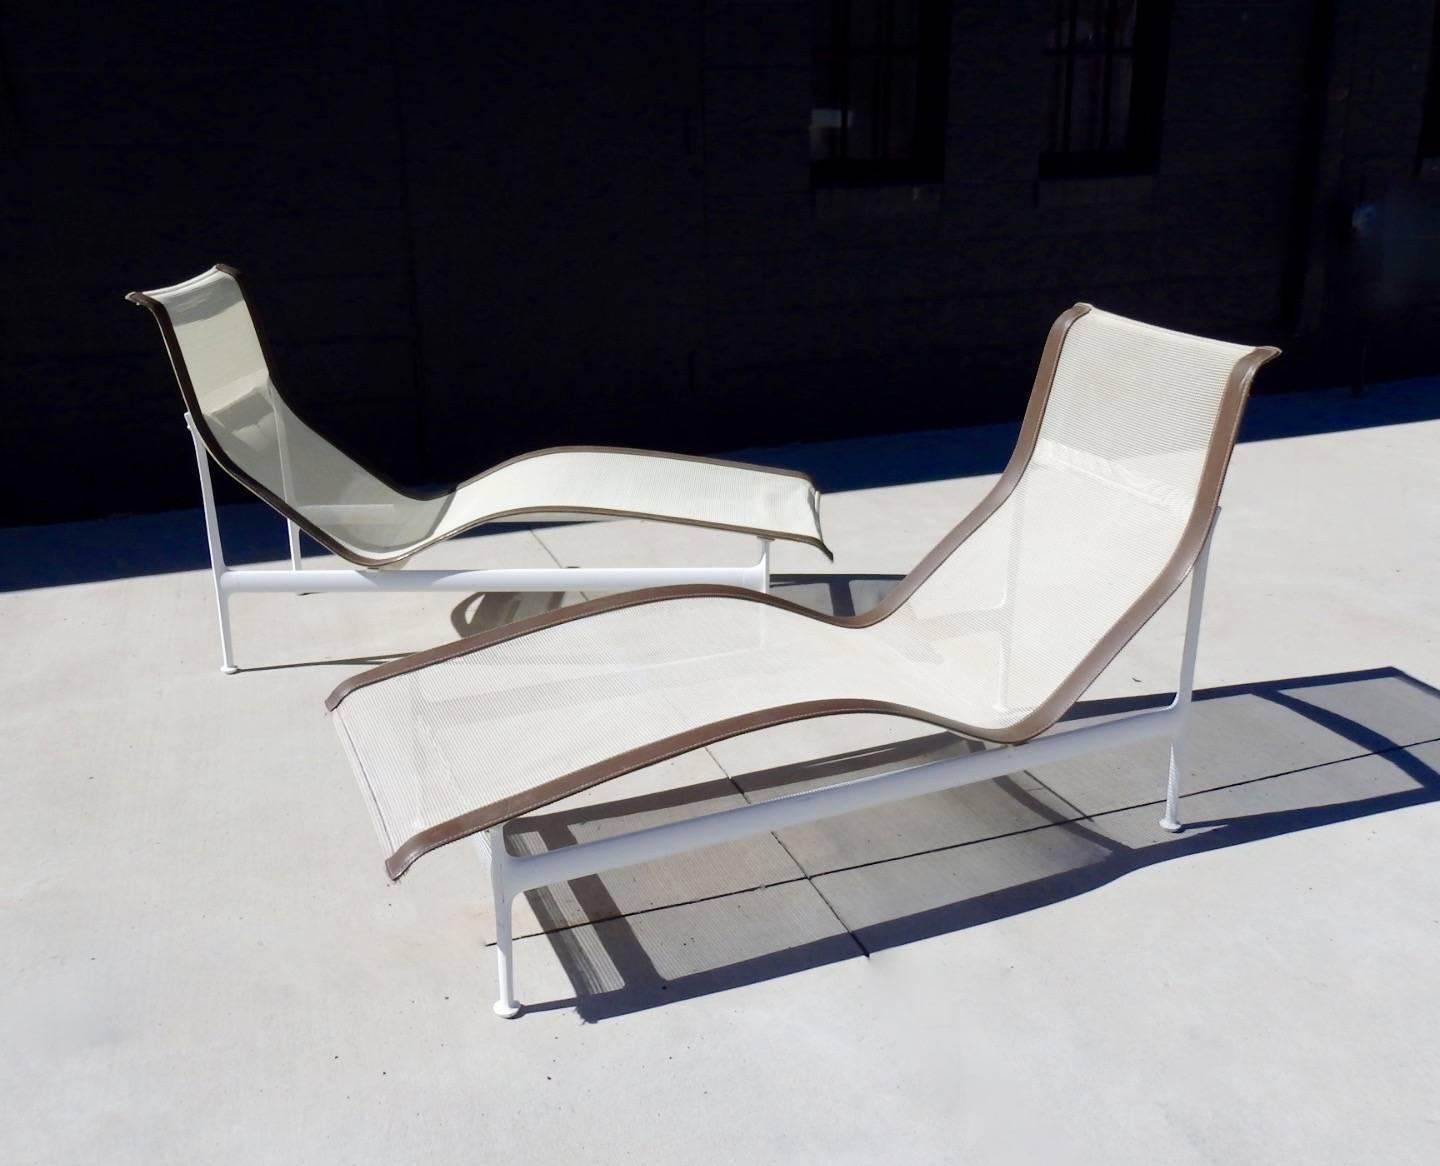 Pair of Schultz for Knoll chaise lounges. Introduced in 1966 at the request of Florence Knoll , who, tired of rusty outdoor furniture asked for outdoor furniture that could stand up to Floridas moist and salty weather. This pair looks to be new old